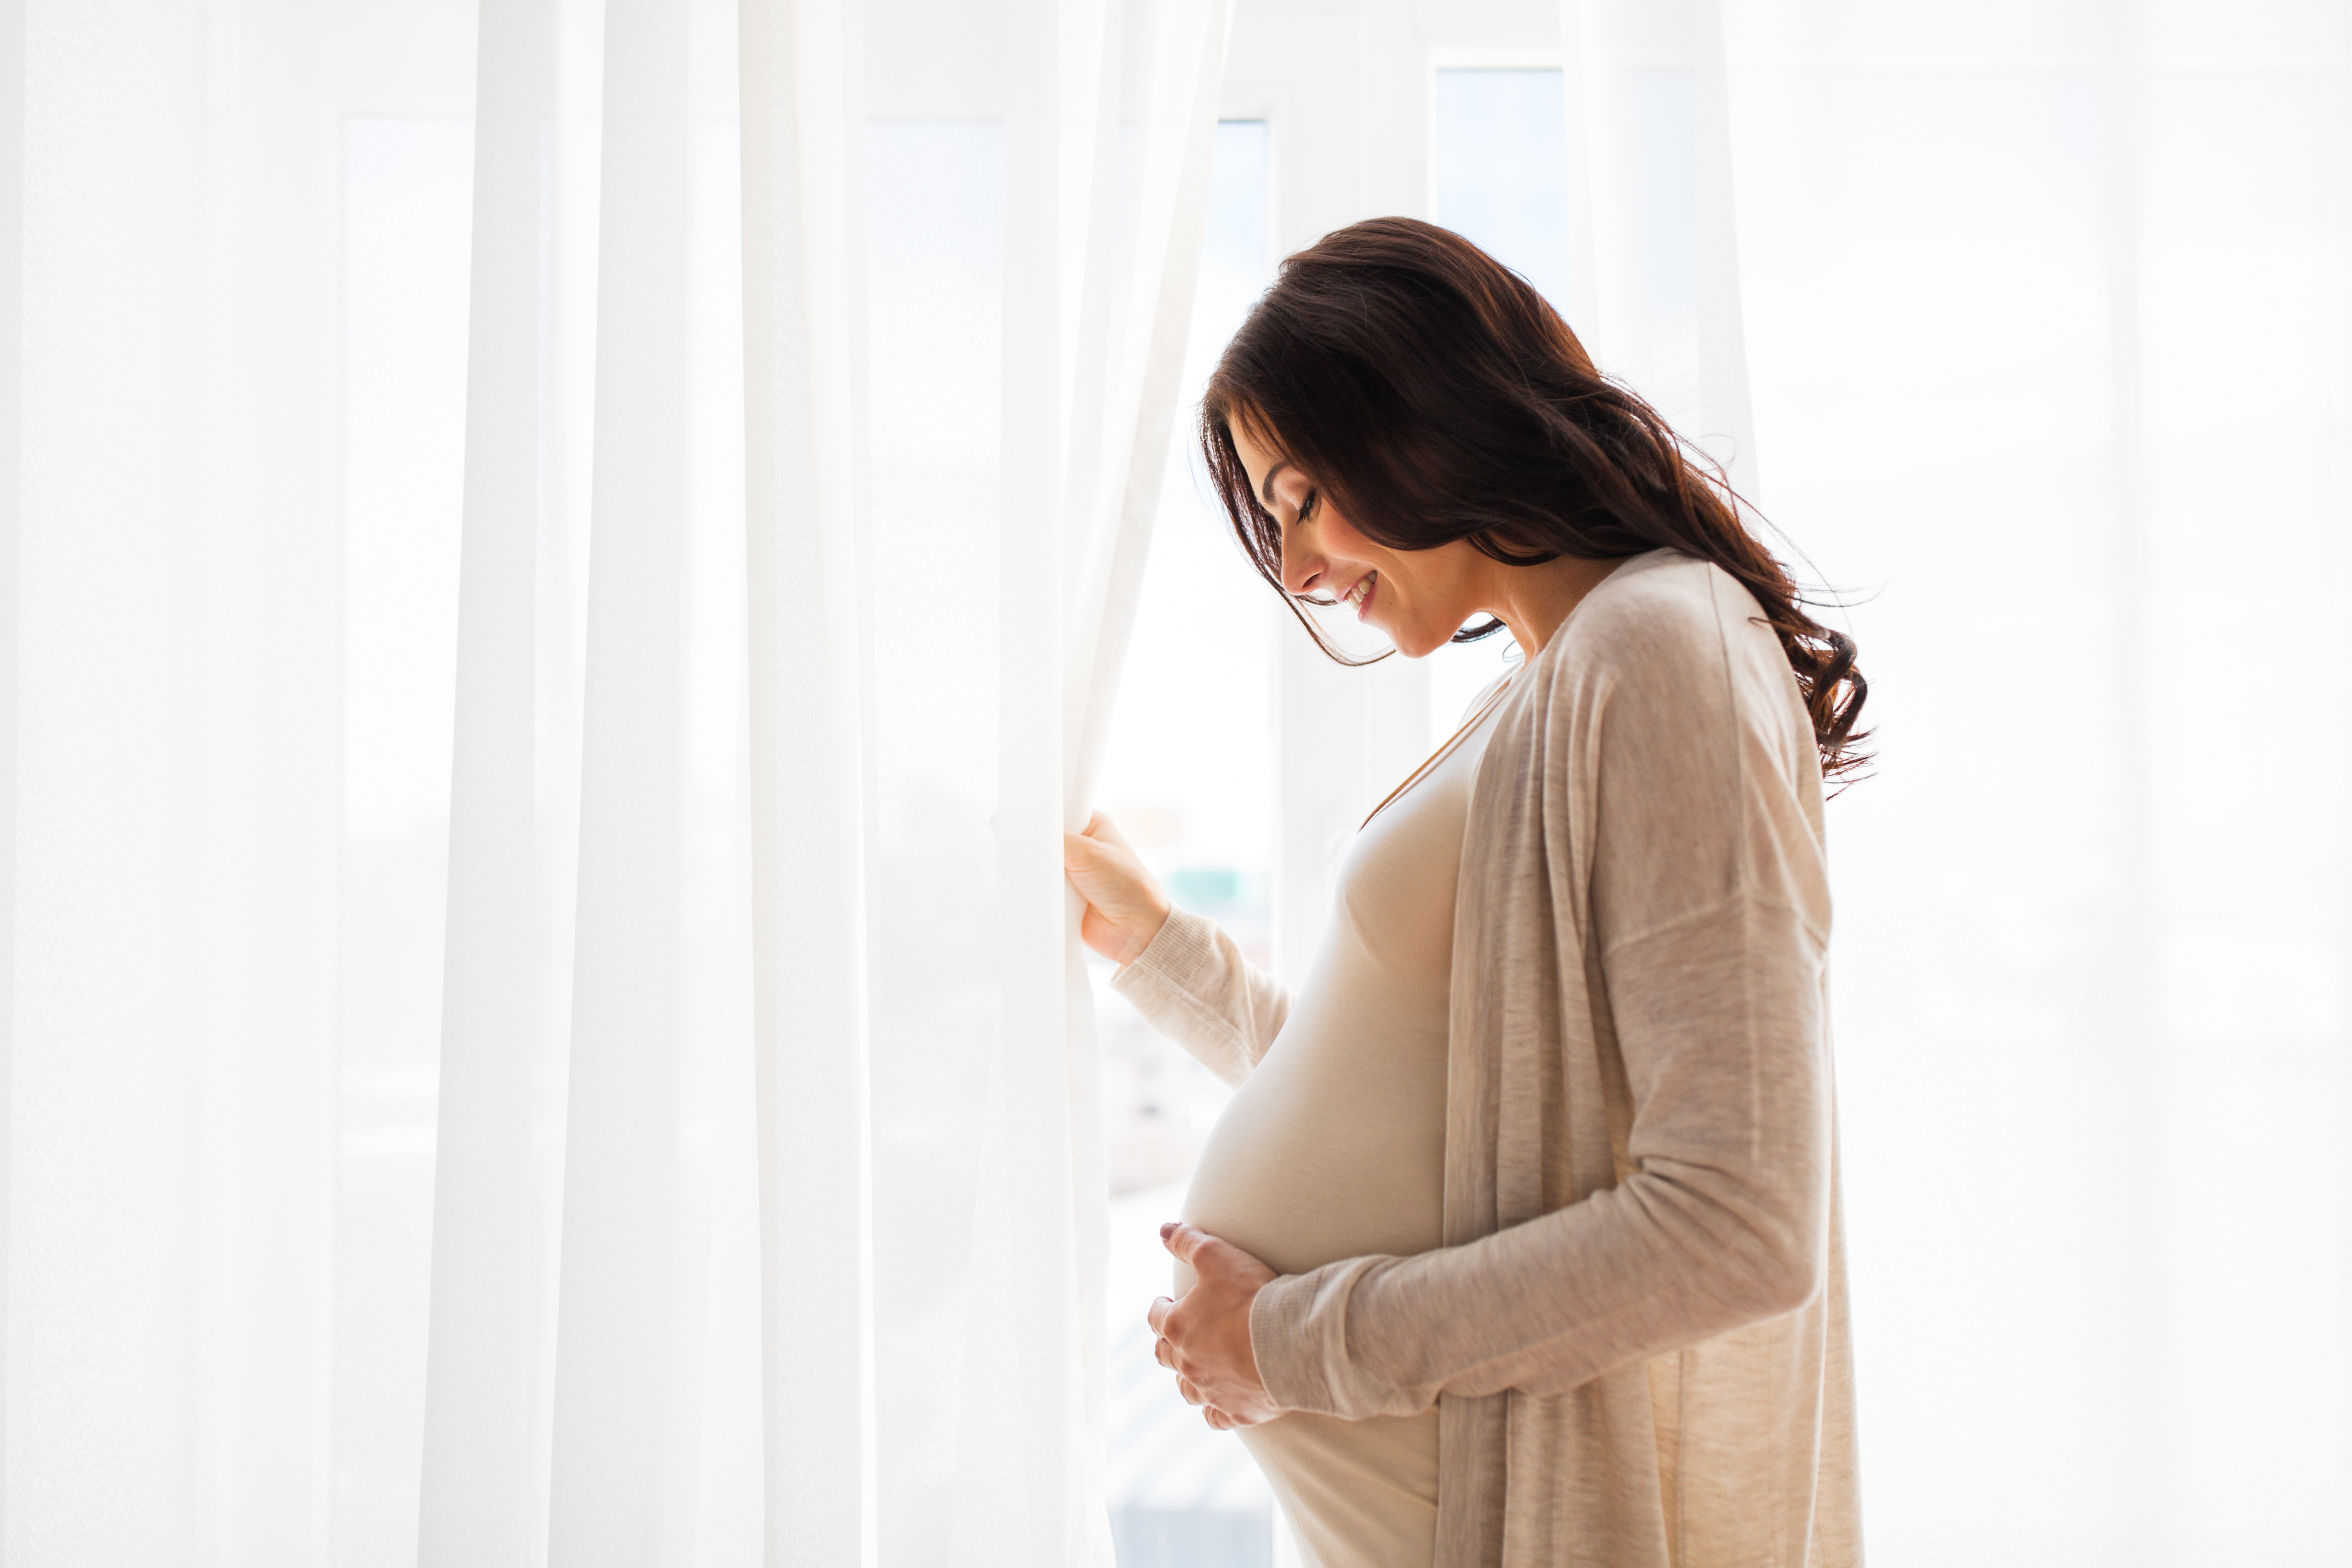 Choosing a Gestational Carrier for Your Baby